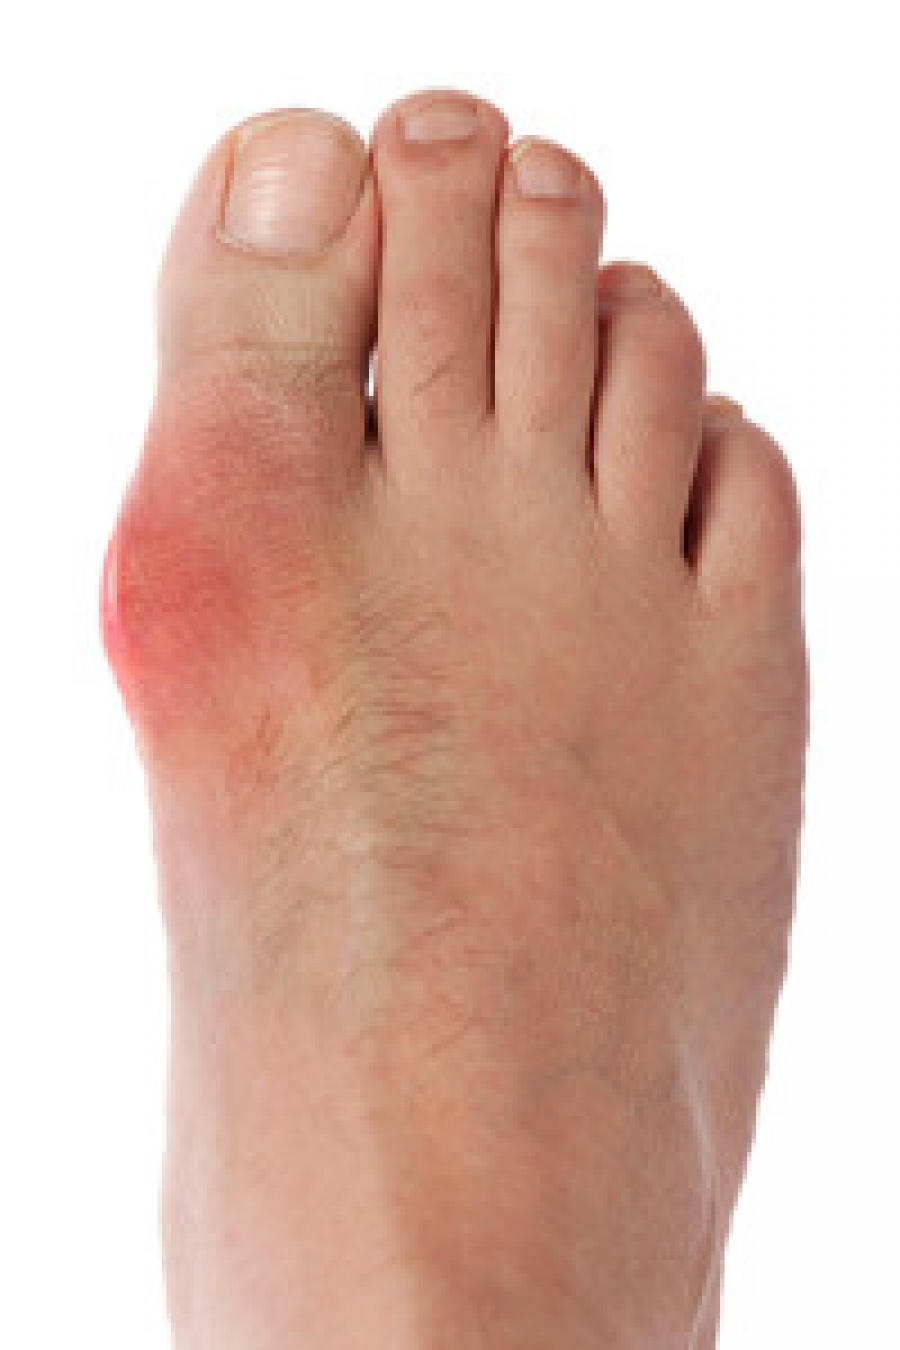 Painful Gout Attacks